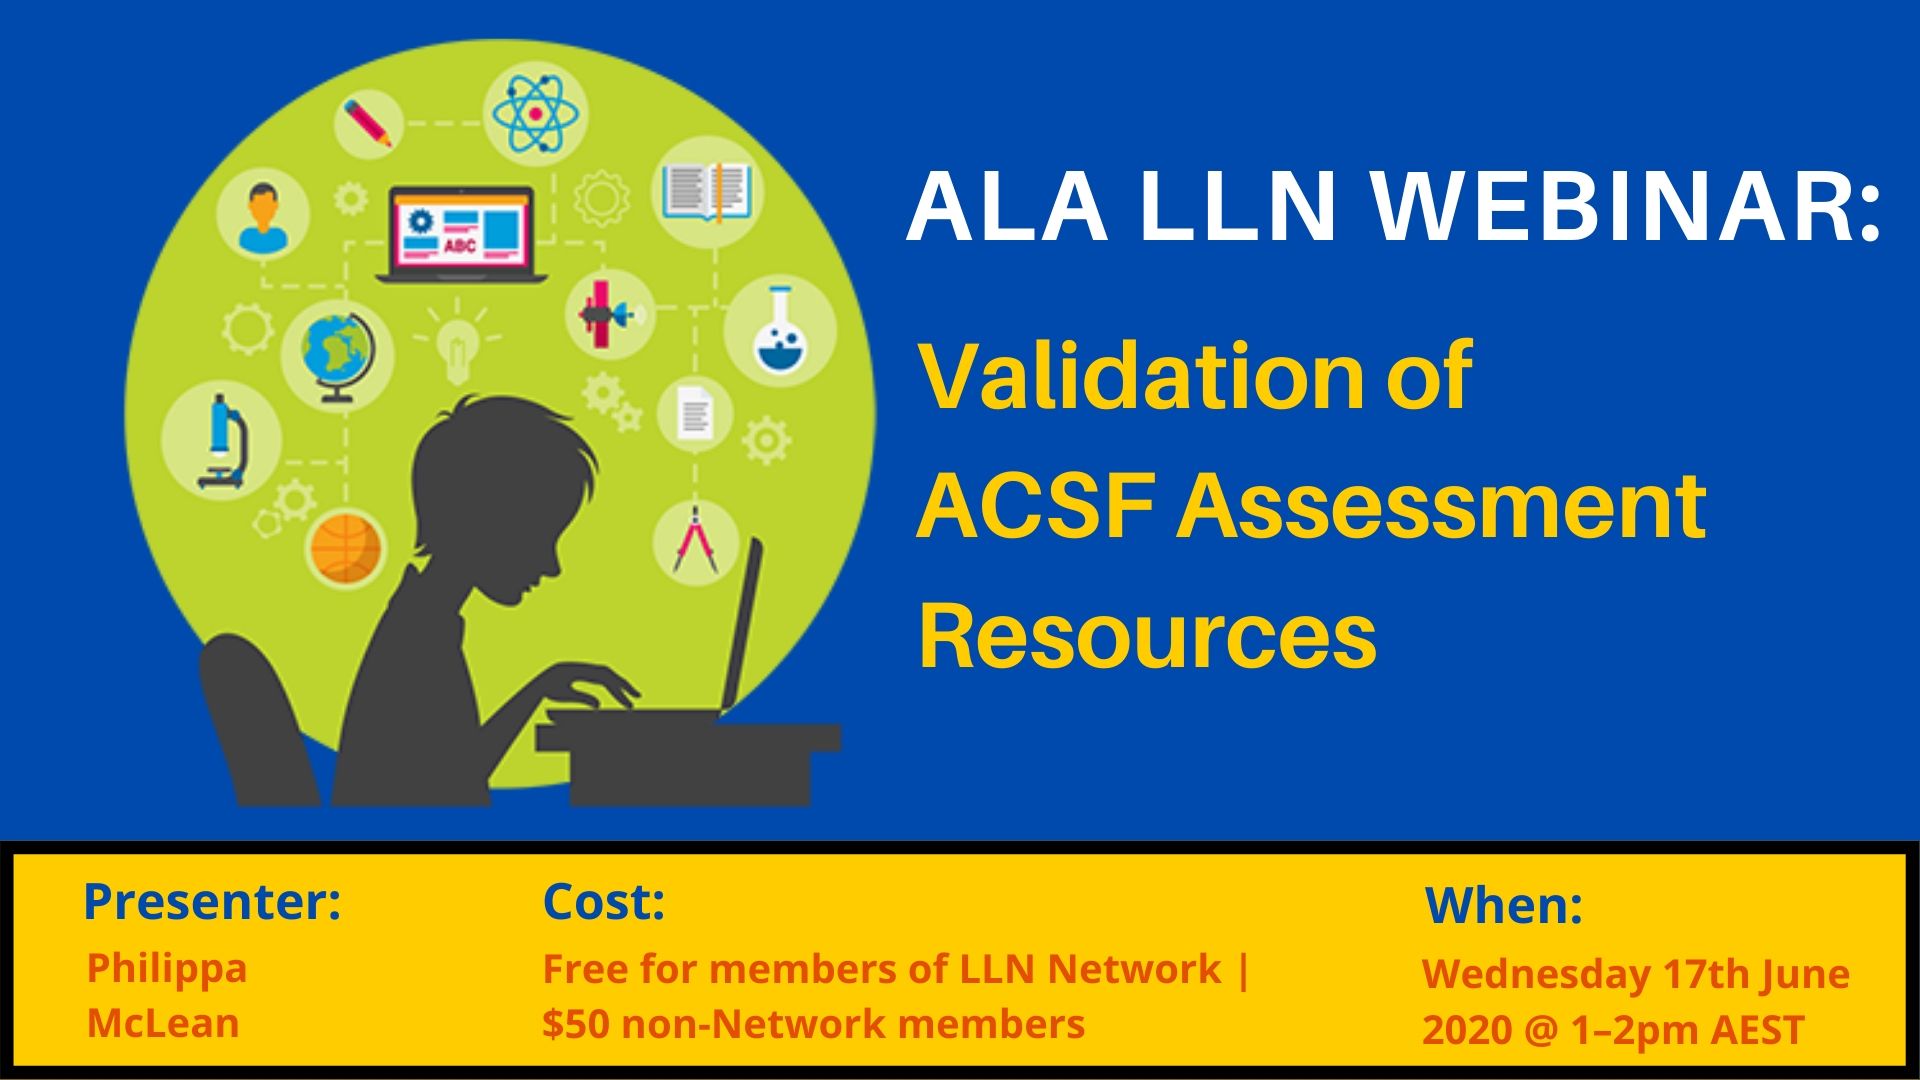 Validation of ACSF assessment resources